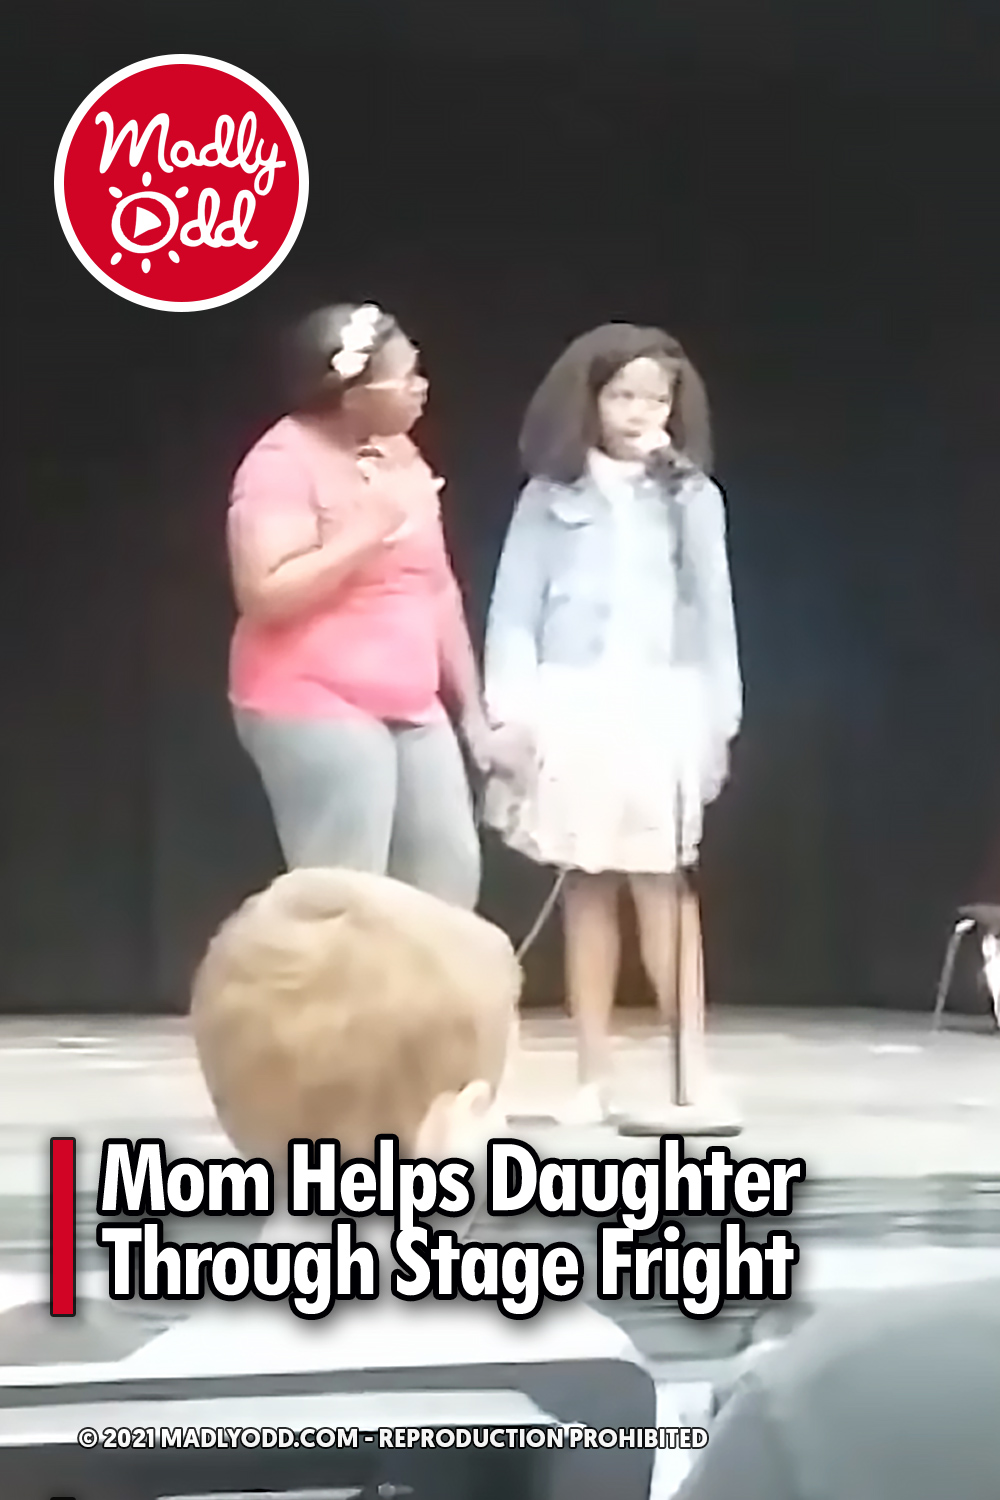 Mom Helps Daughter Through Stage Fright